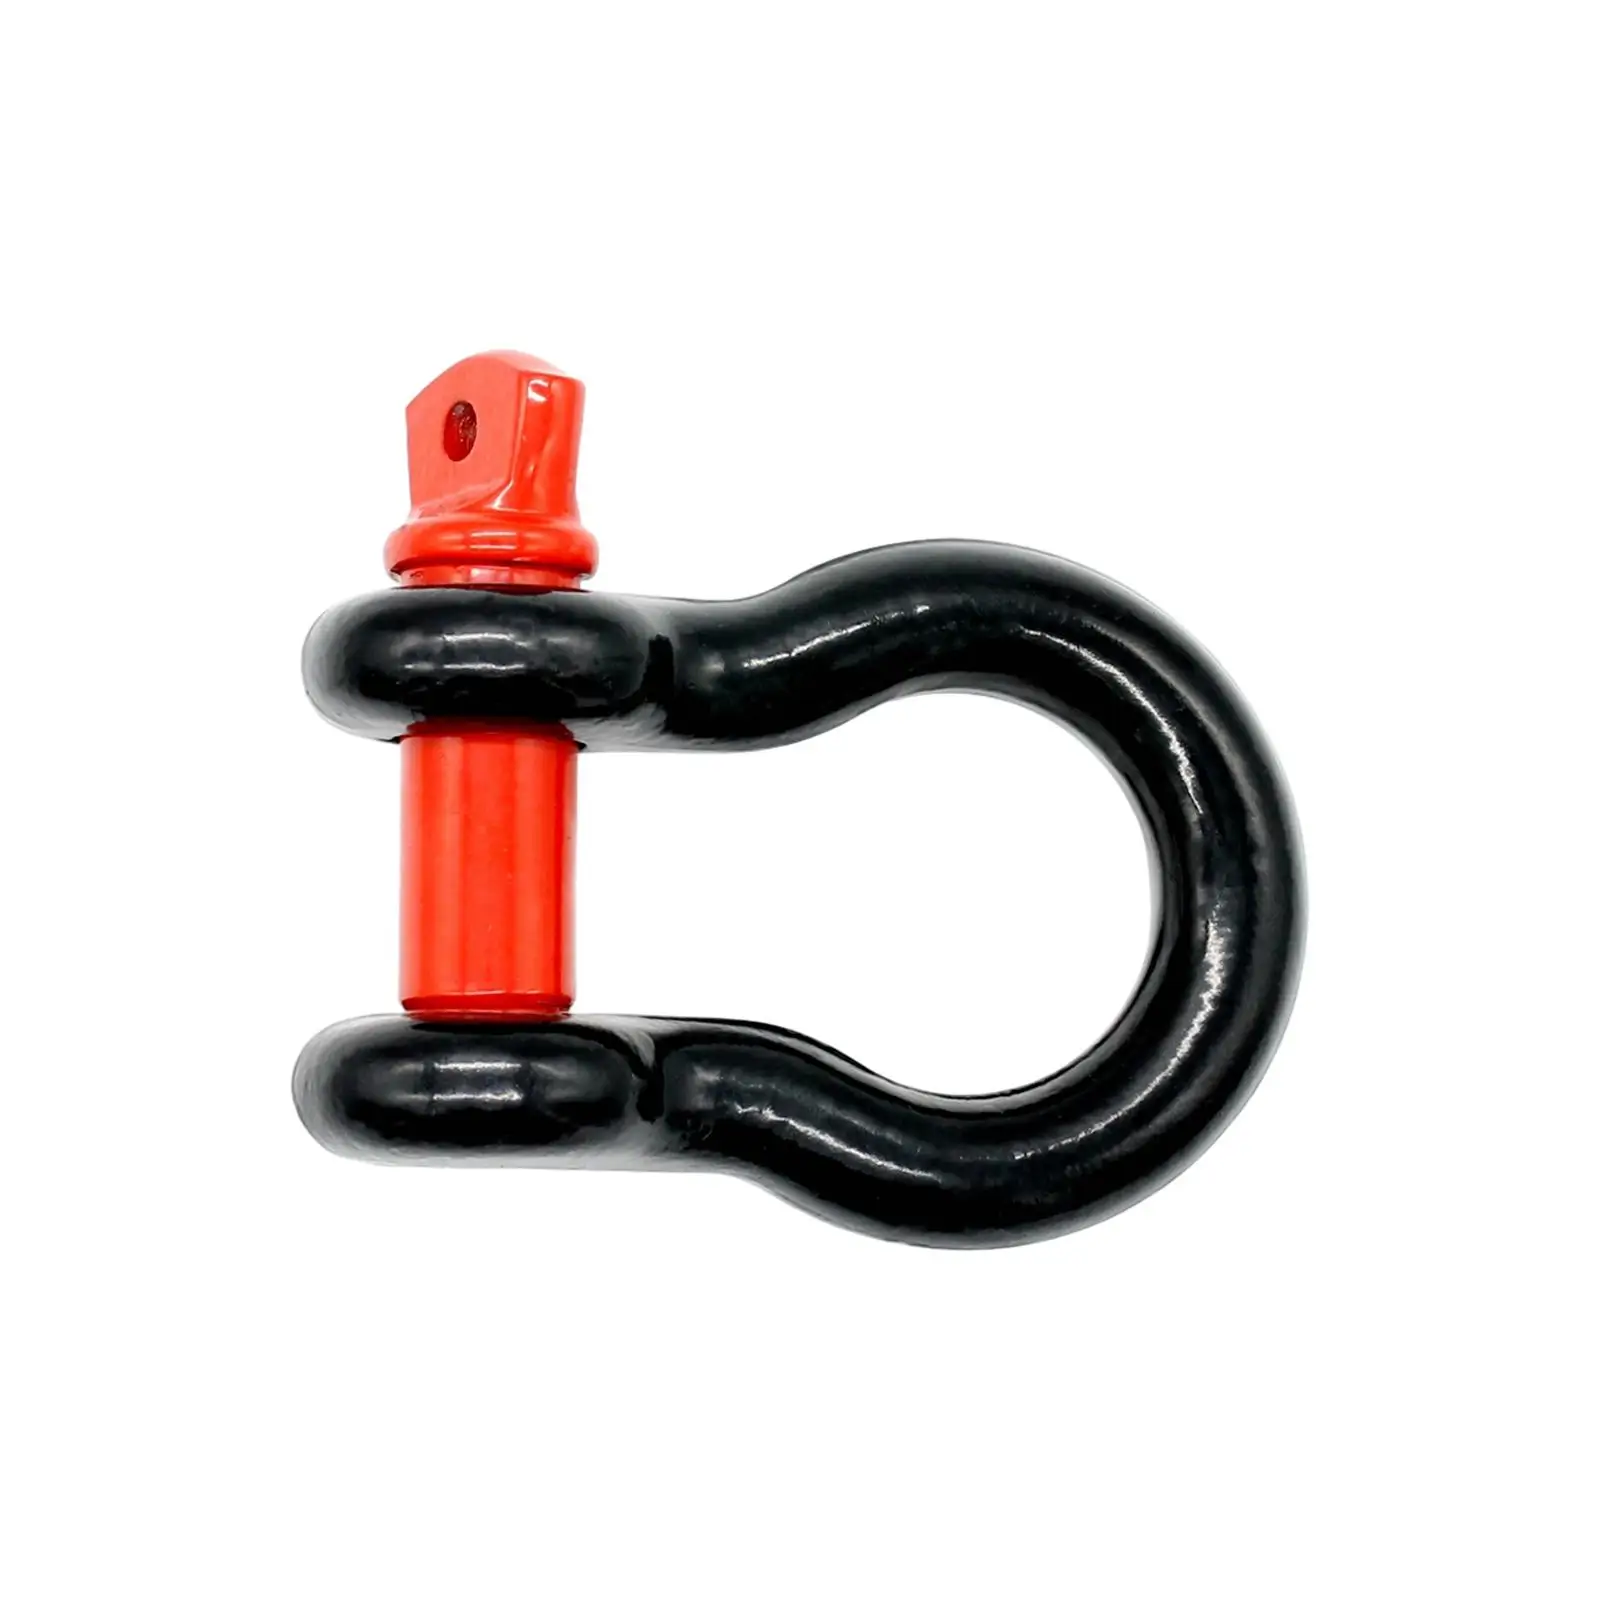 Tow Hook Ring D Ring Shackle 6.5T Accessories Sturdy Universal Tow Shackles Tow Hook Trailer for Winch Accessories Truck